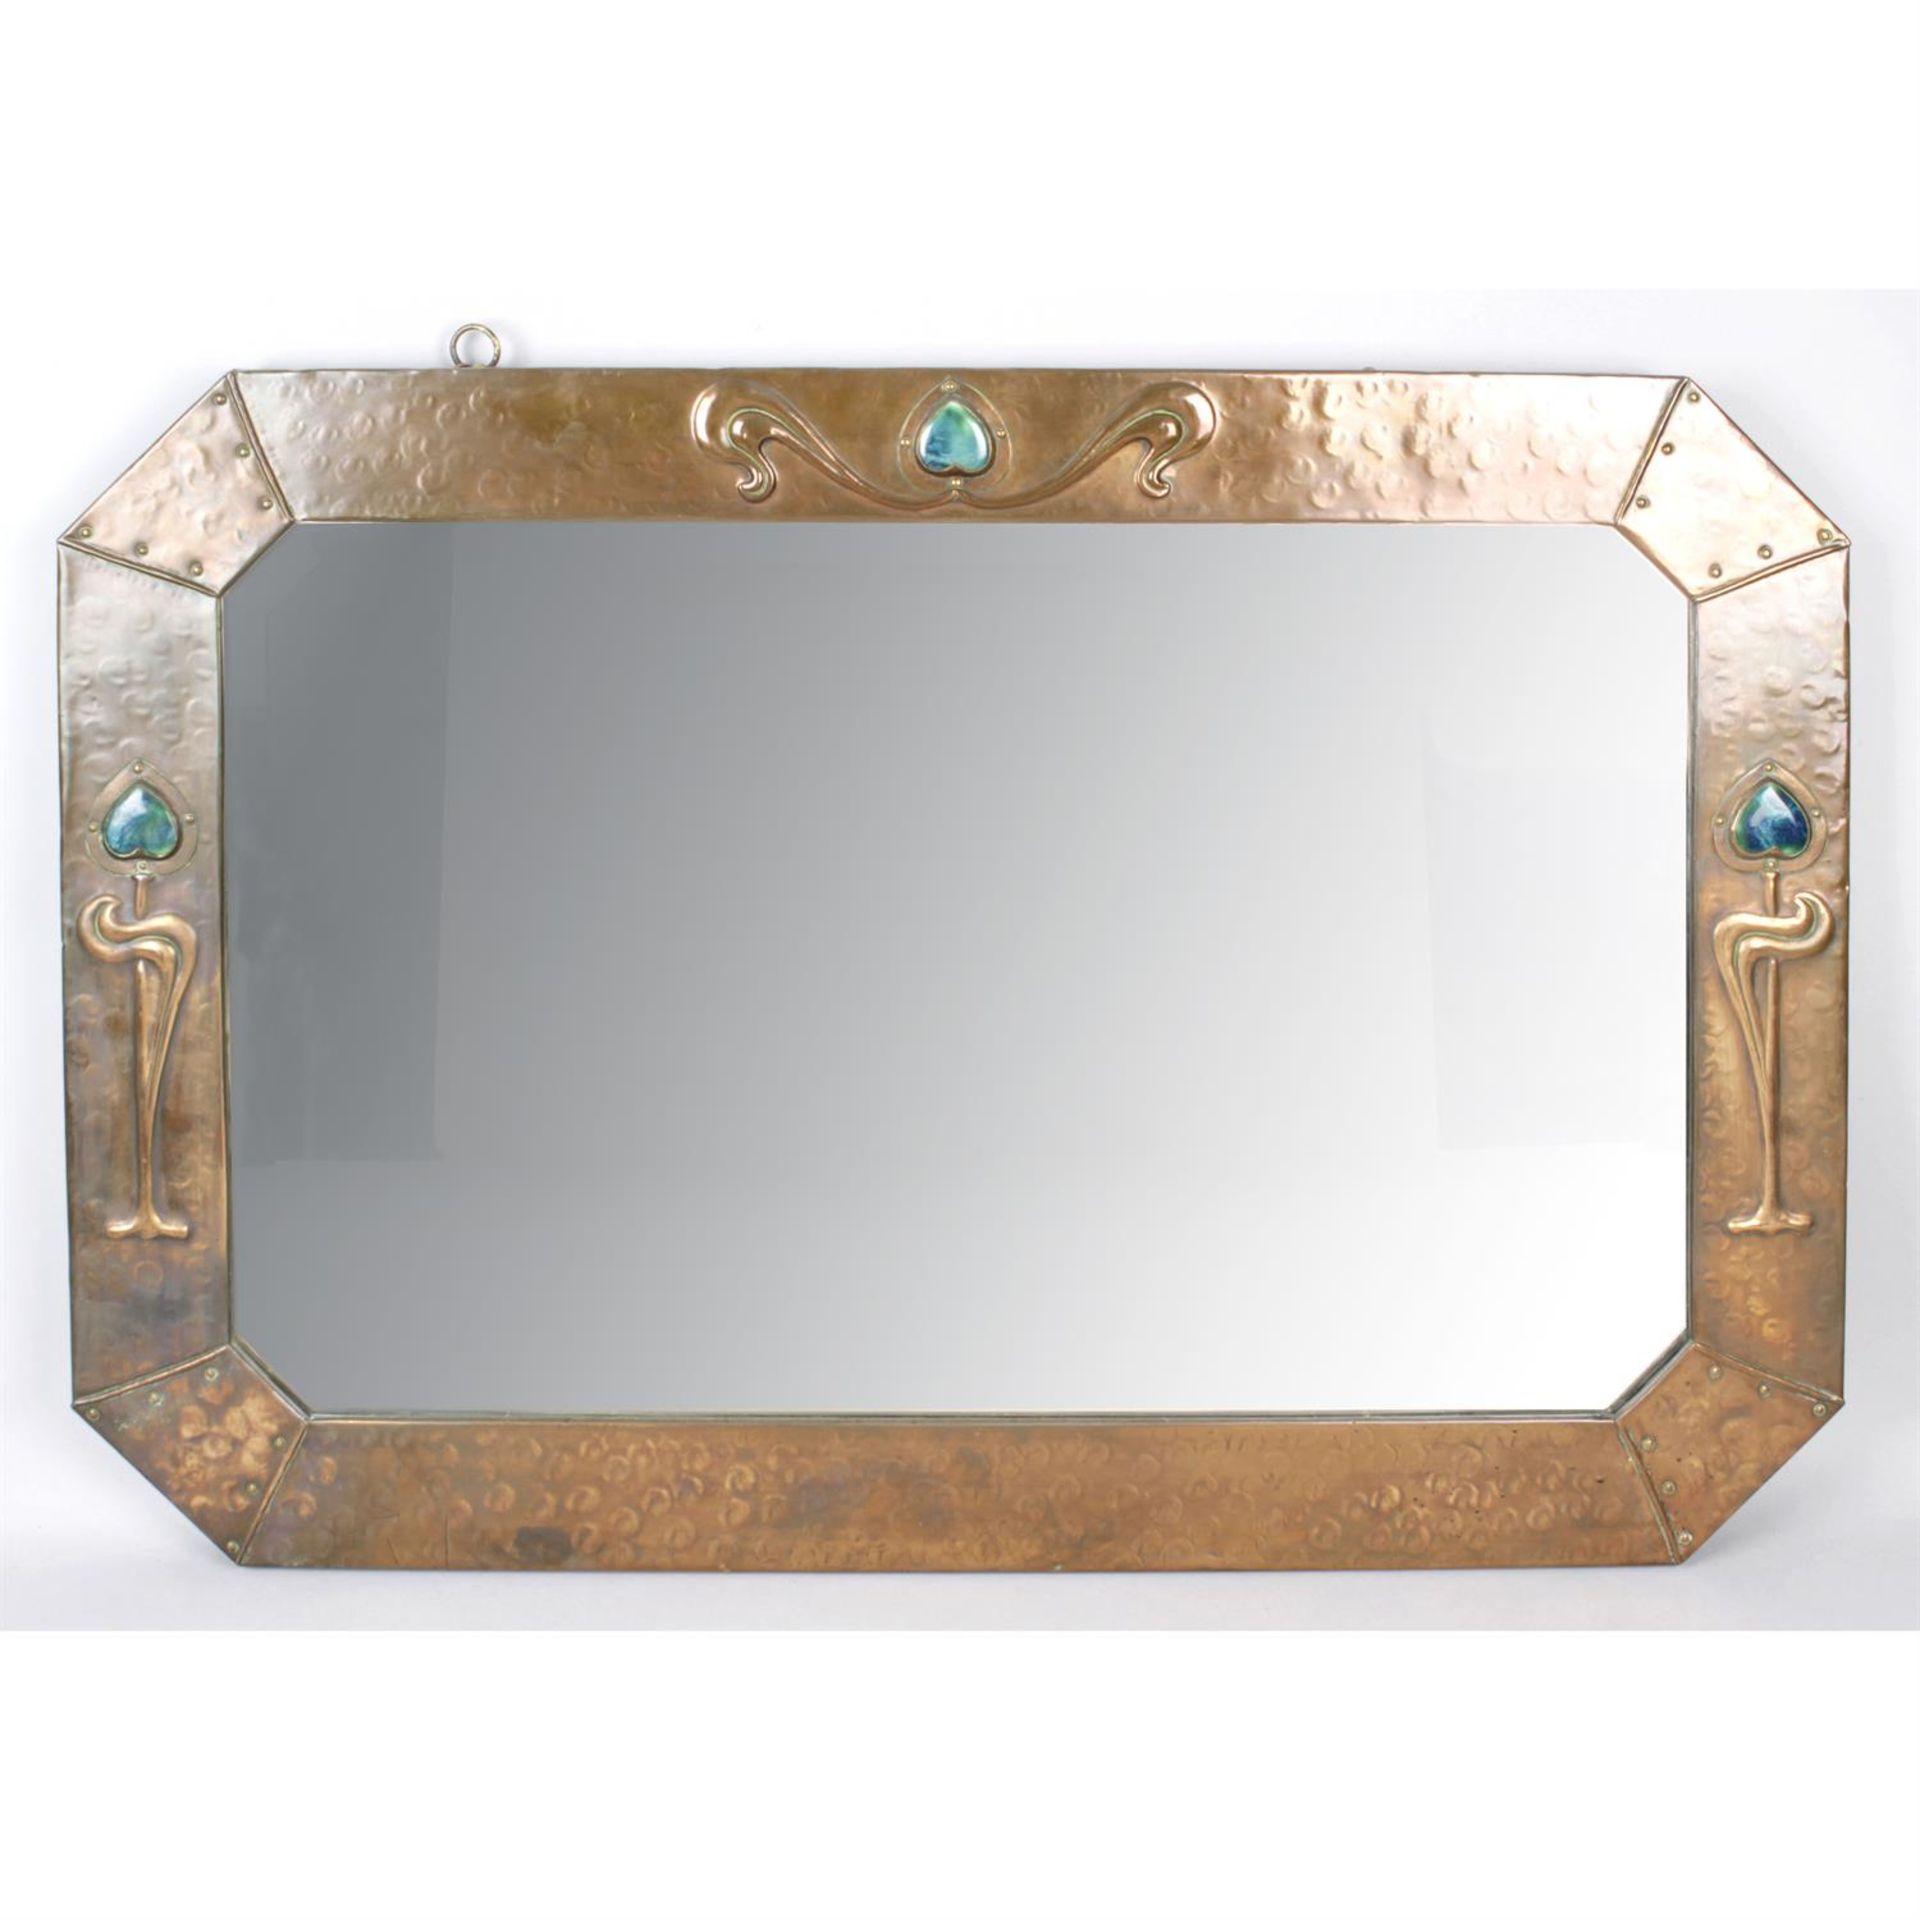 An early 20th century Arts & Crafts copper framed wall mirror.